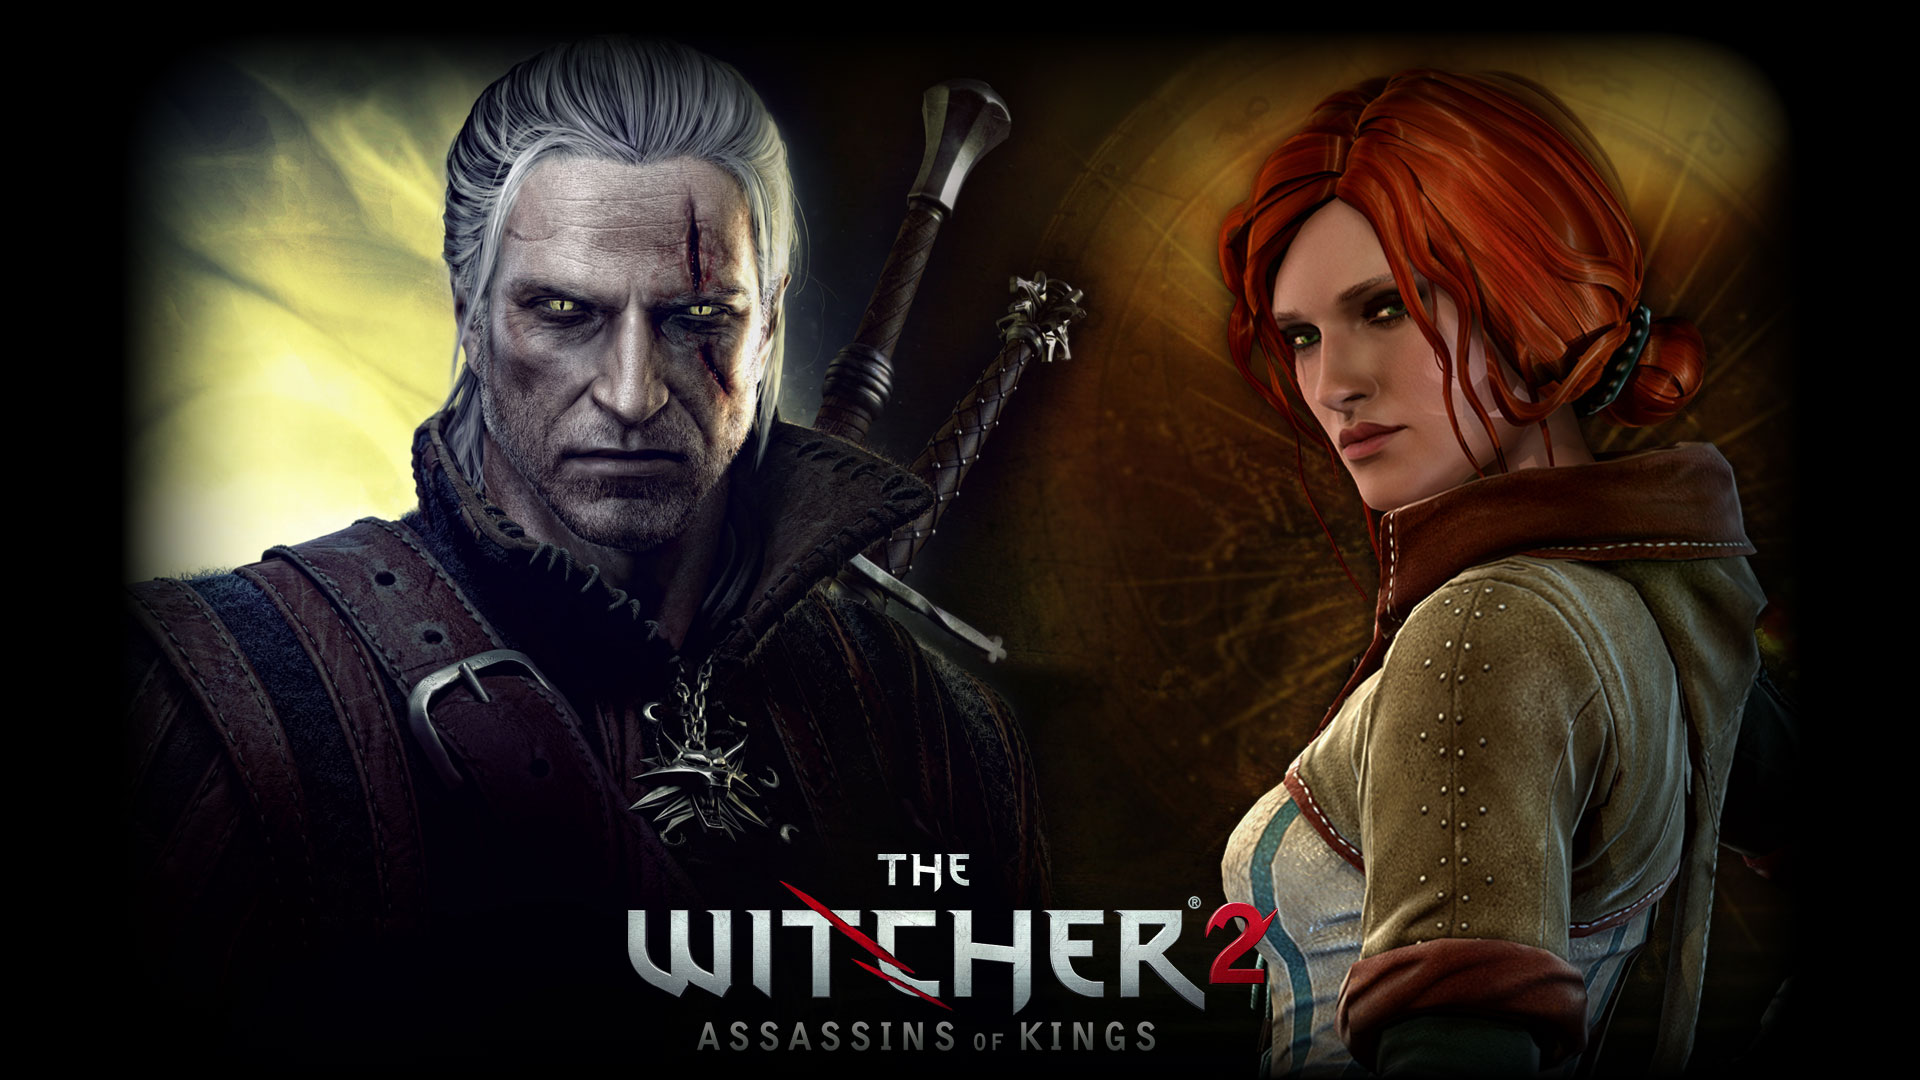 Witcher Wallpaper In HD